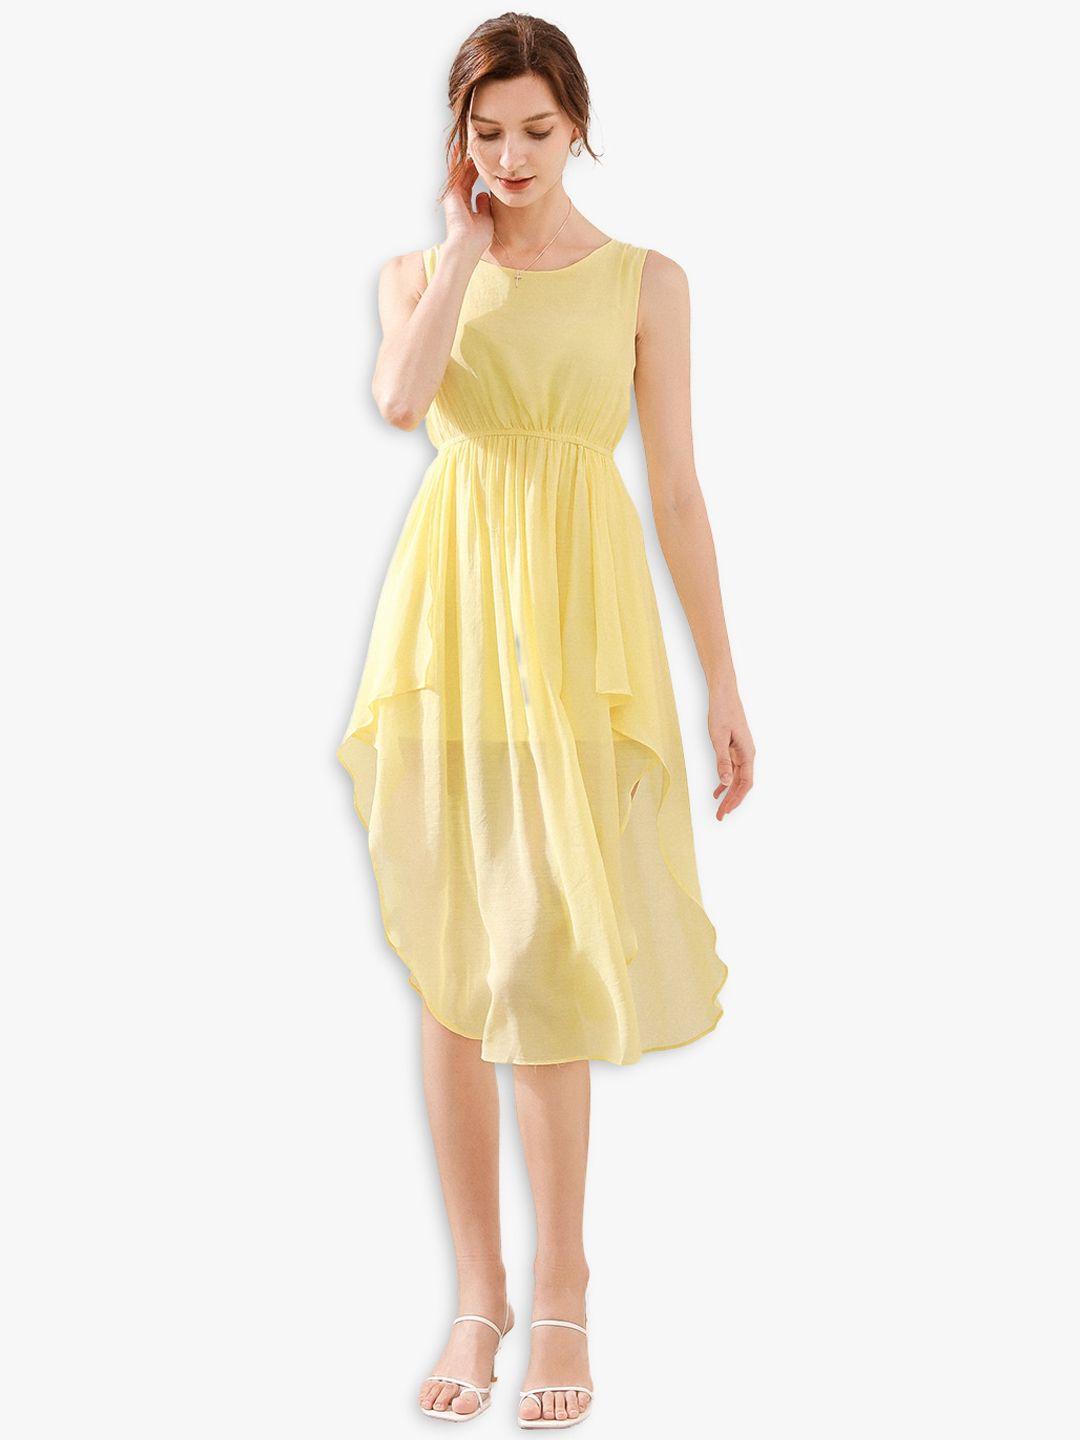 jc collection yellow solid dress